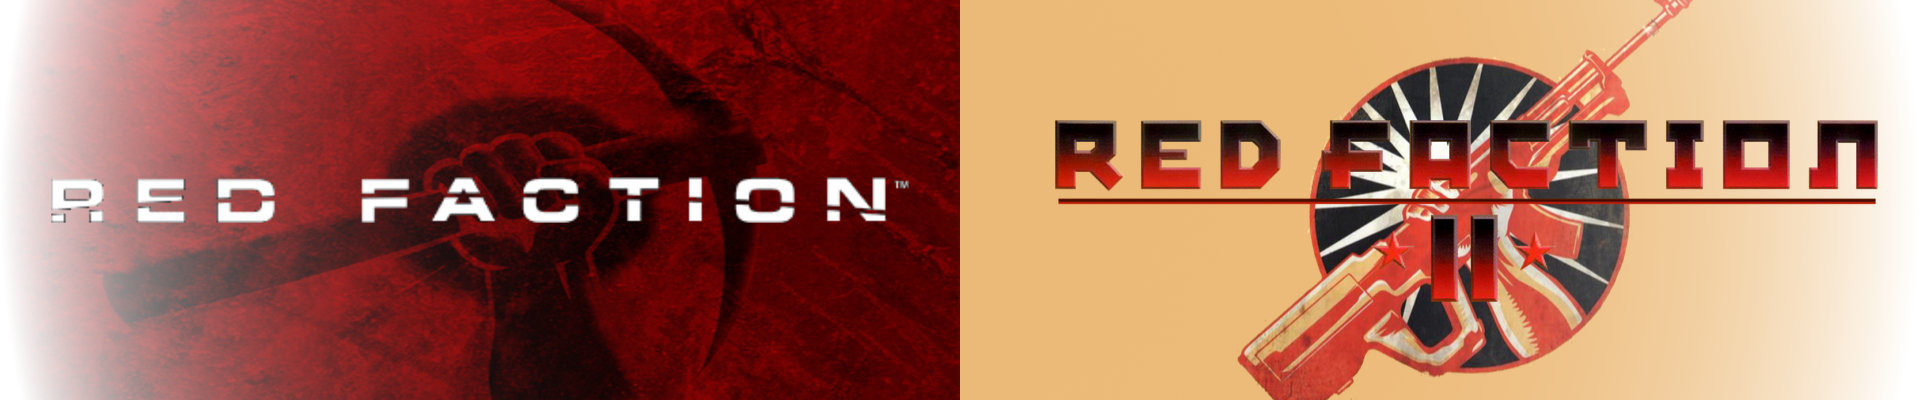 О часи: Red Faction та Red Faction II